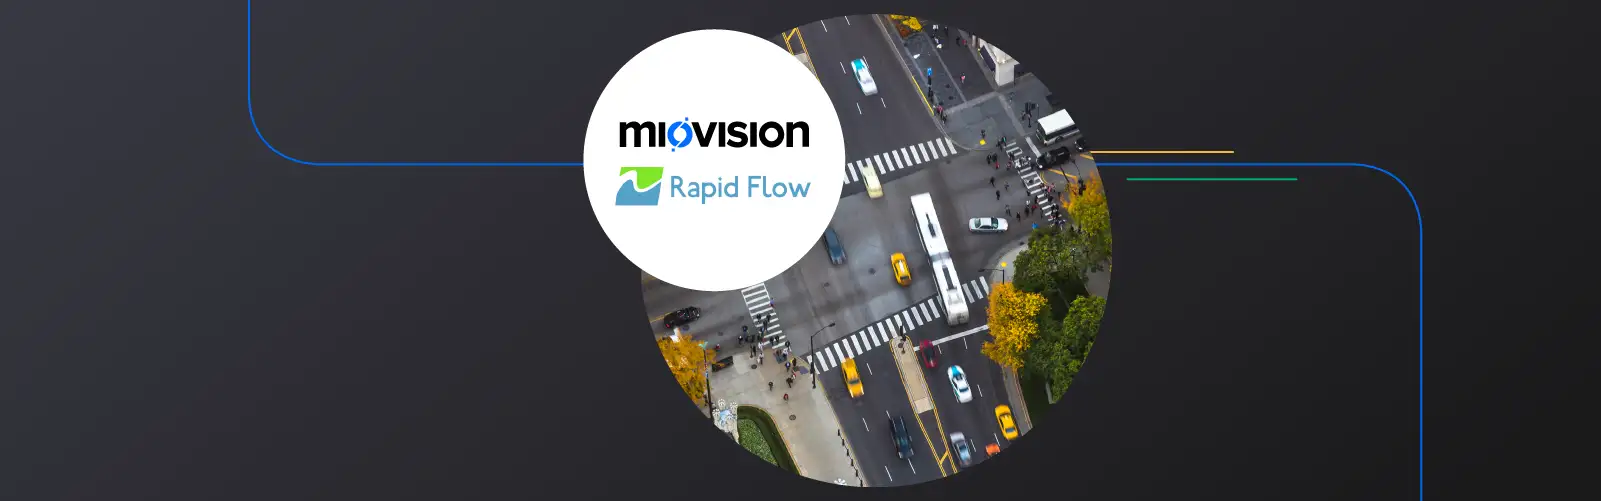 Welcome, Rapid Flow - Miovision